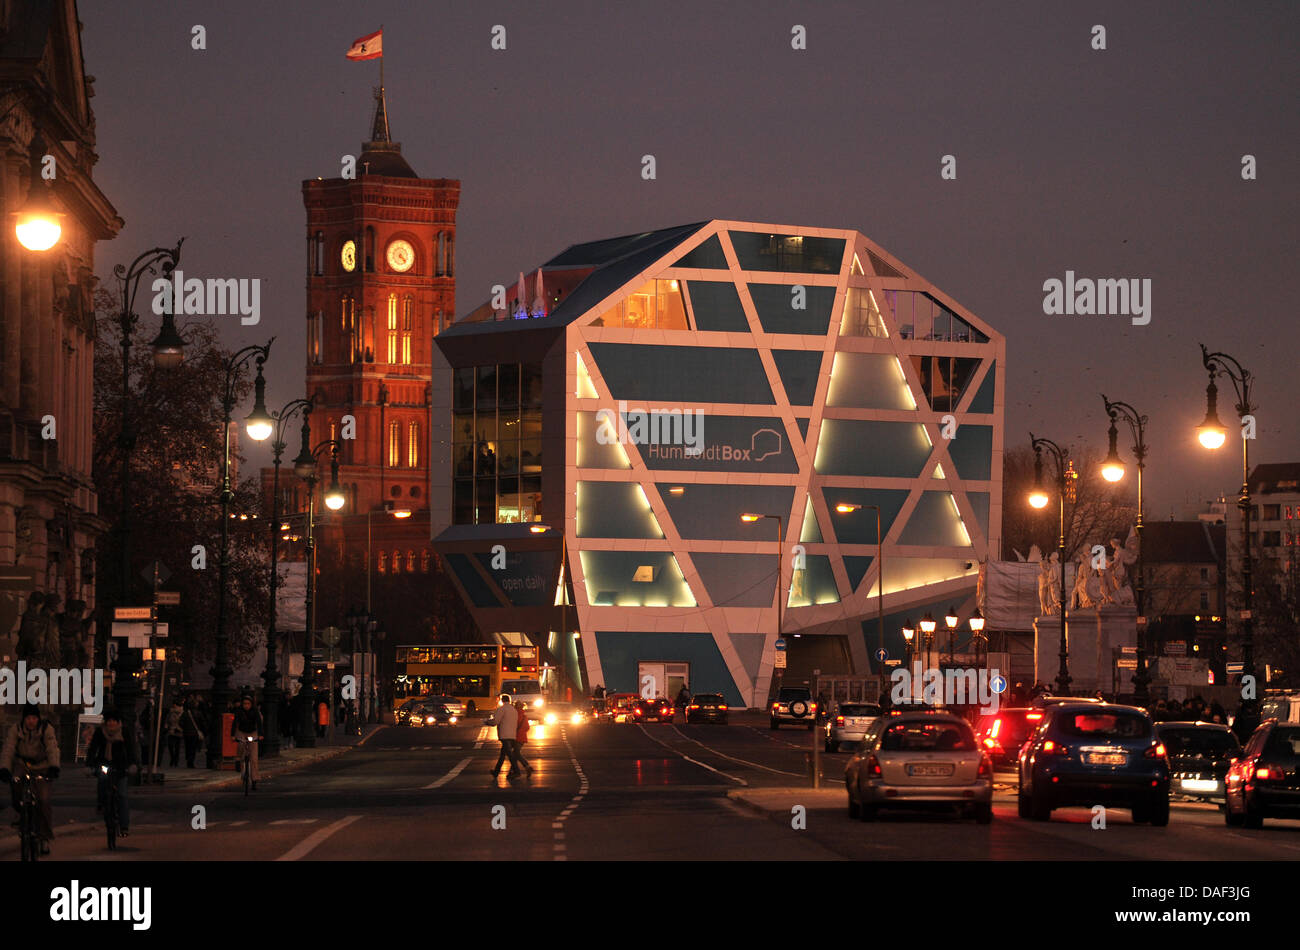 The Humboldt Box and the Red Town Hall are illuminated in the evening at the boulevard Unter den Linden in Berlin, Germany, 29 November 2011. Photo: Jens Kalaene Stock Photo